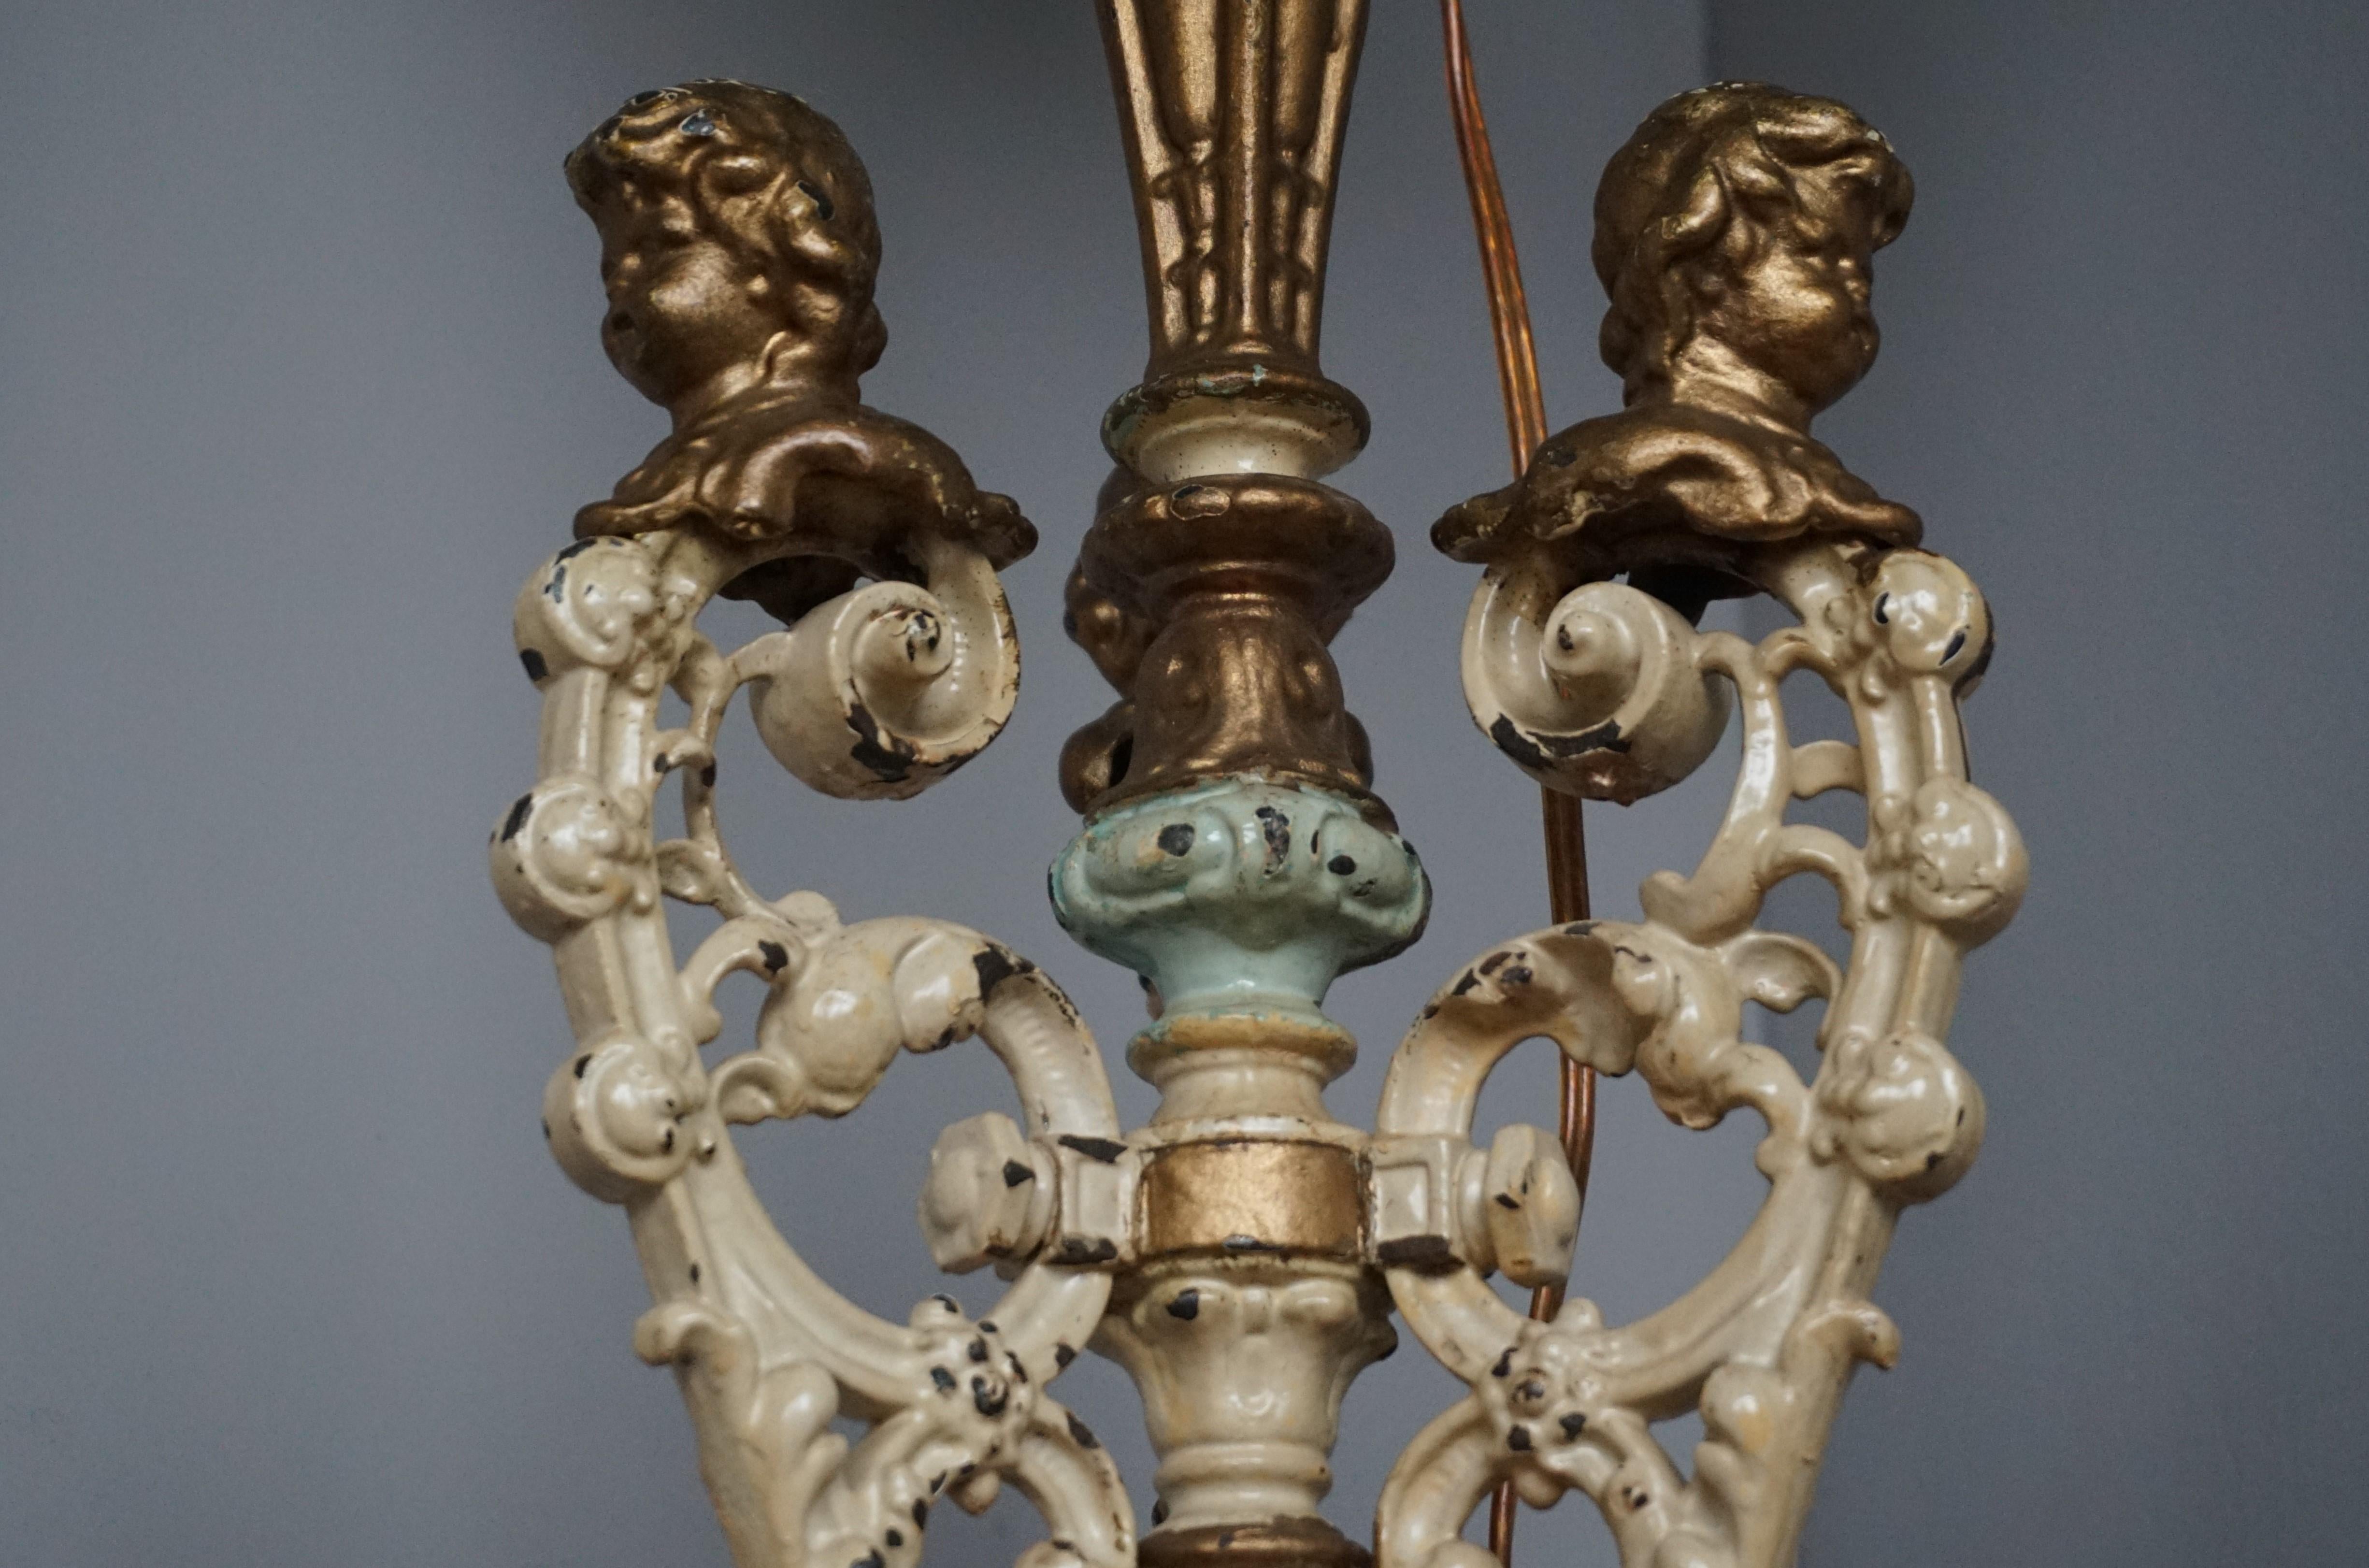 Antique and Painted Cast Iron Baroque Revival Floor Lamp w. Putti Bust Sculpture For Sale 7